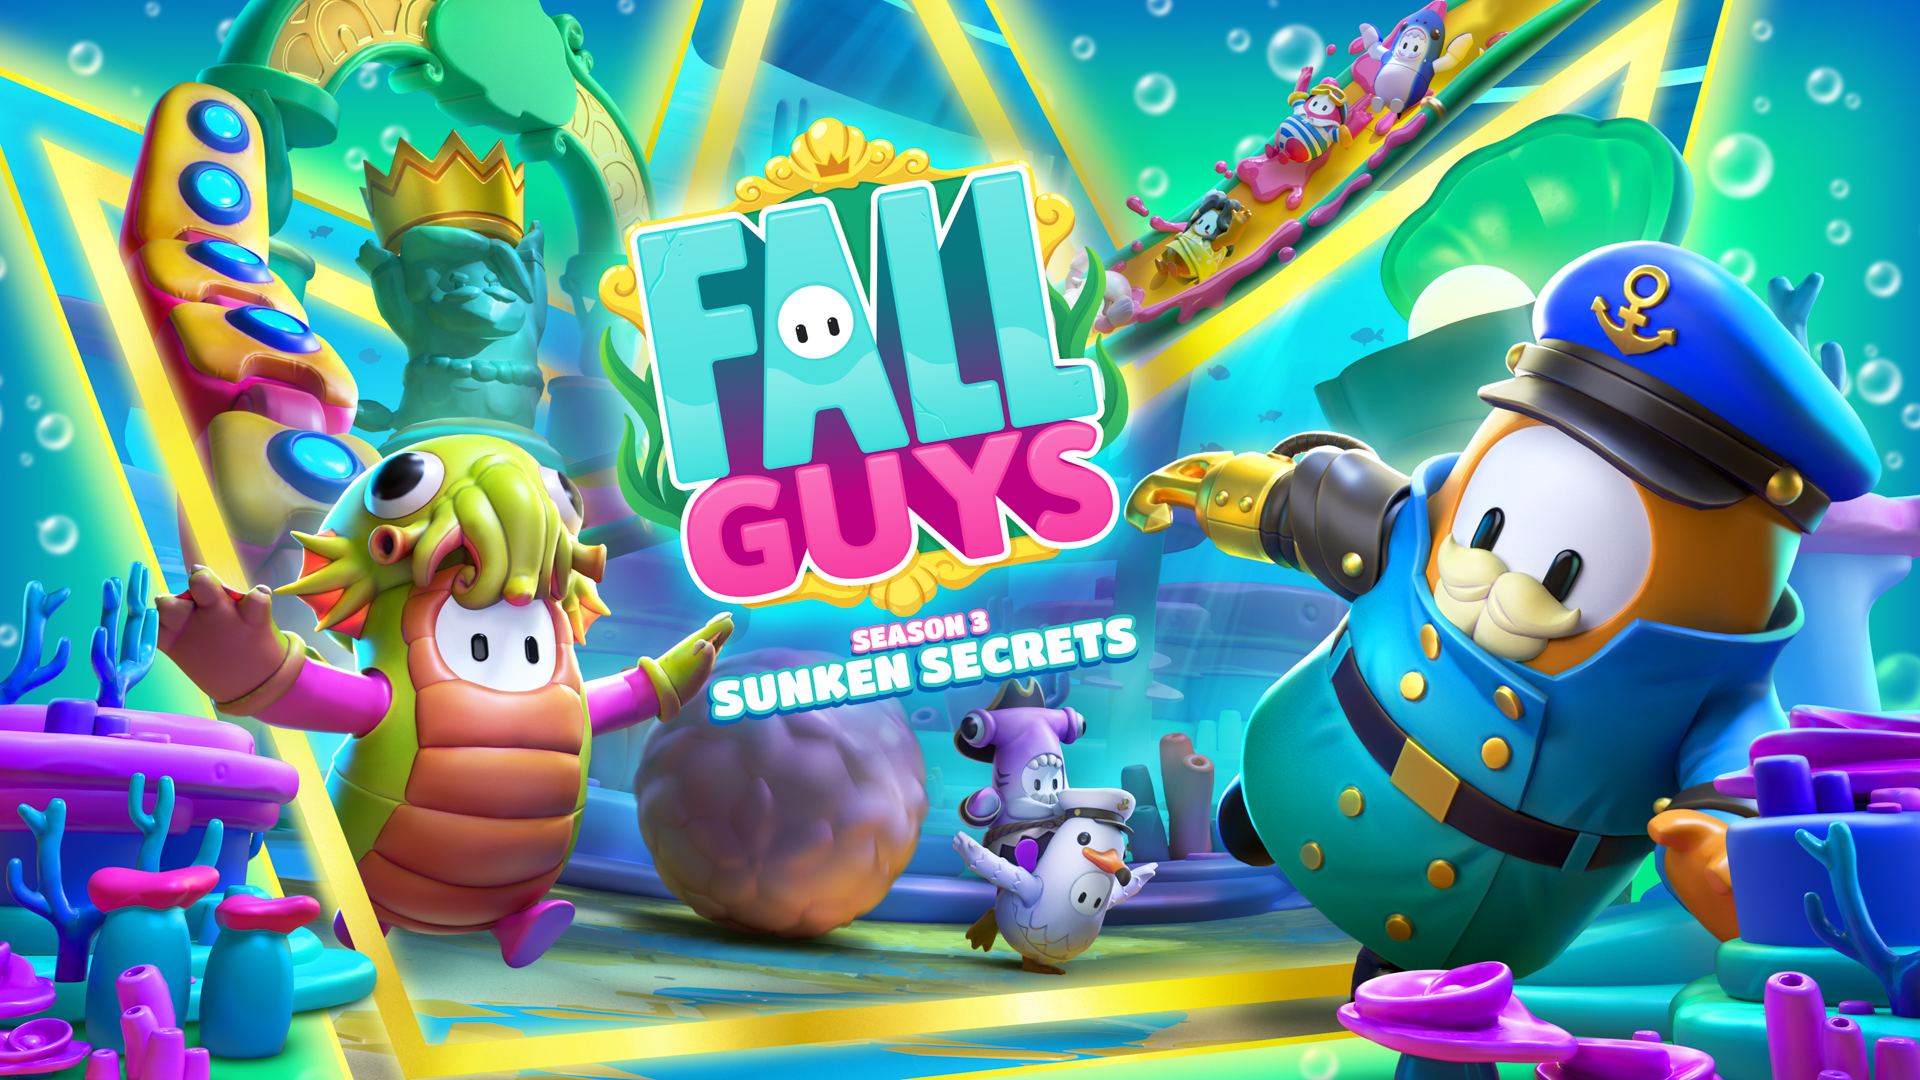 A promotional image for Fall Guys Season 3, called Sunken Secrets. A few beans are in the image, including one dressed like a sailor, and one dressed like a sea monster.